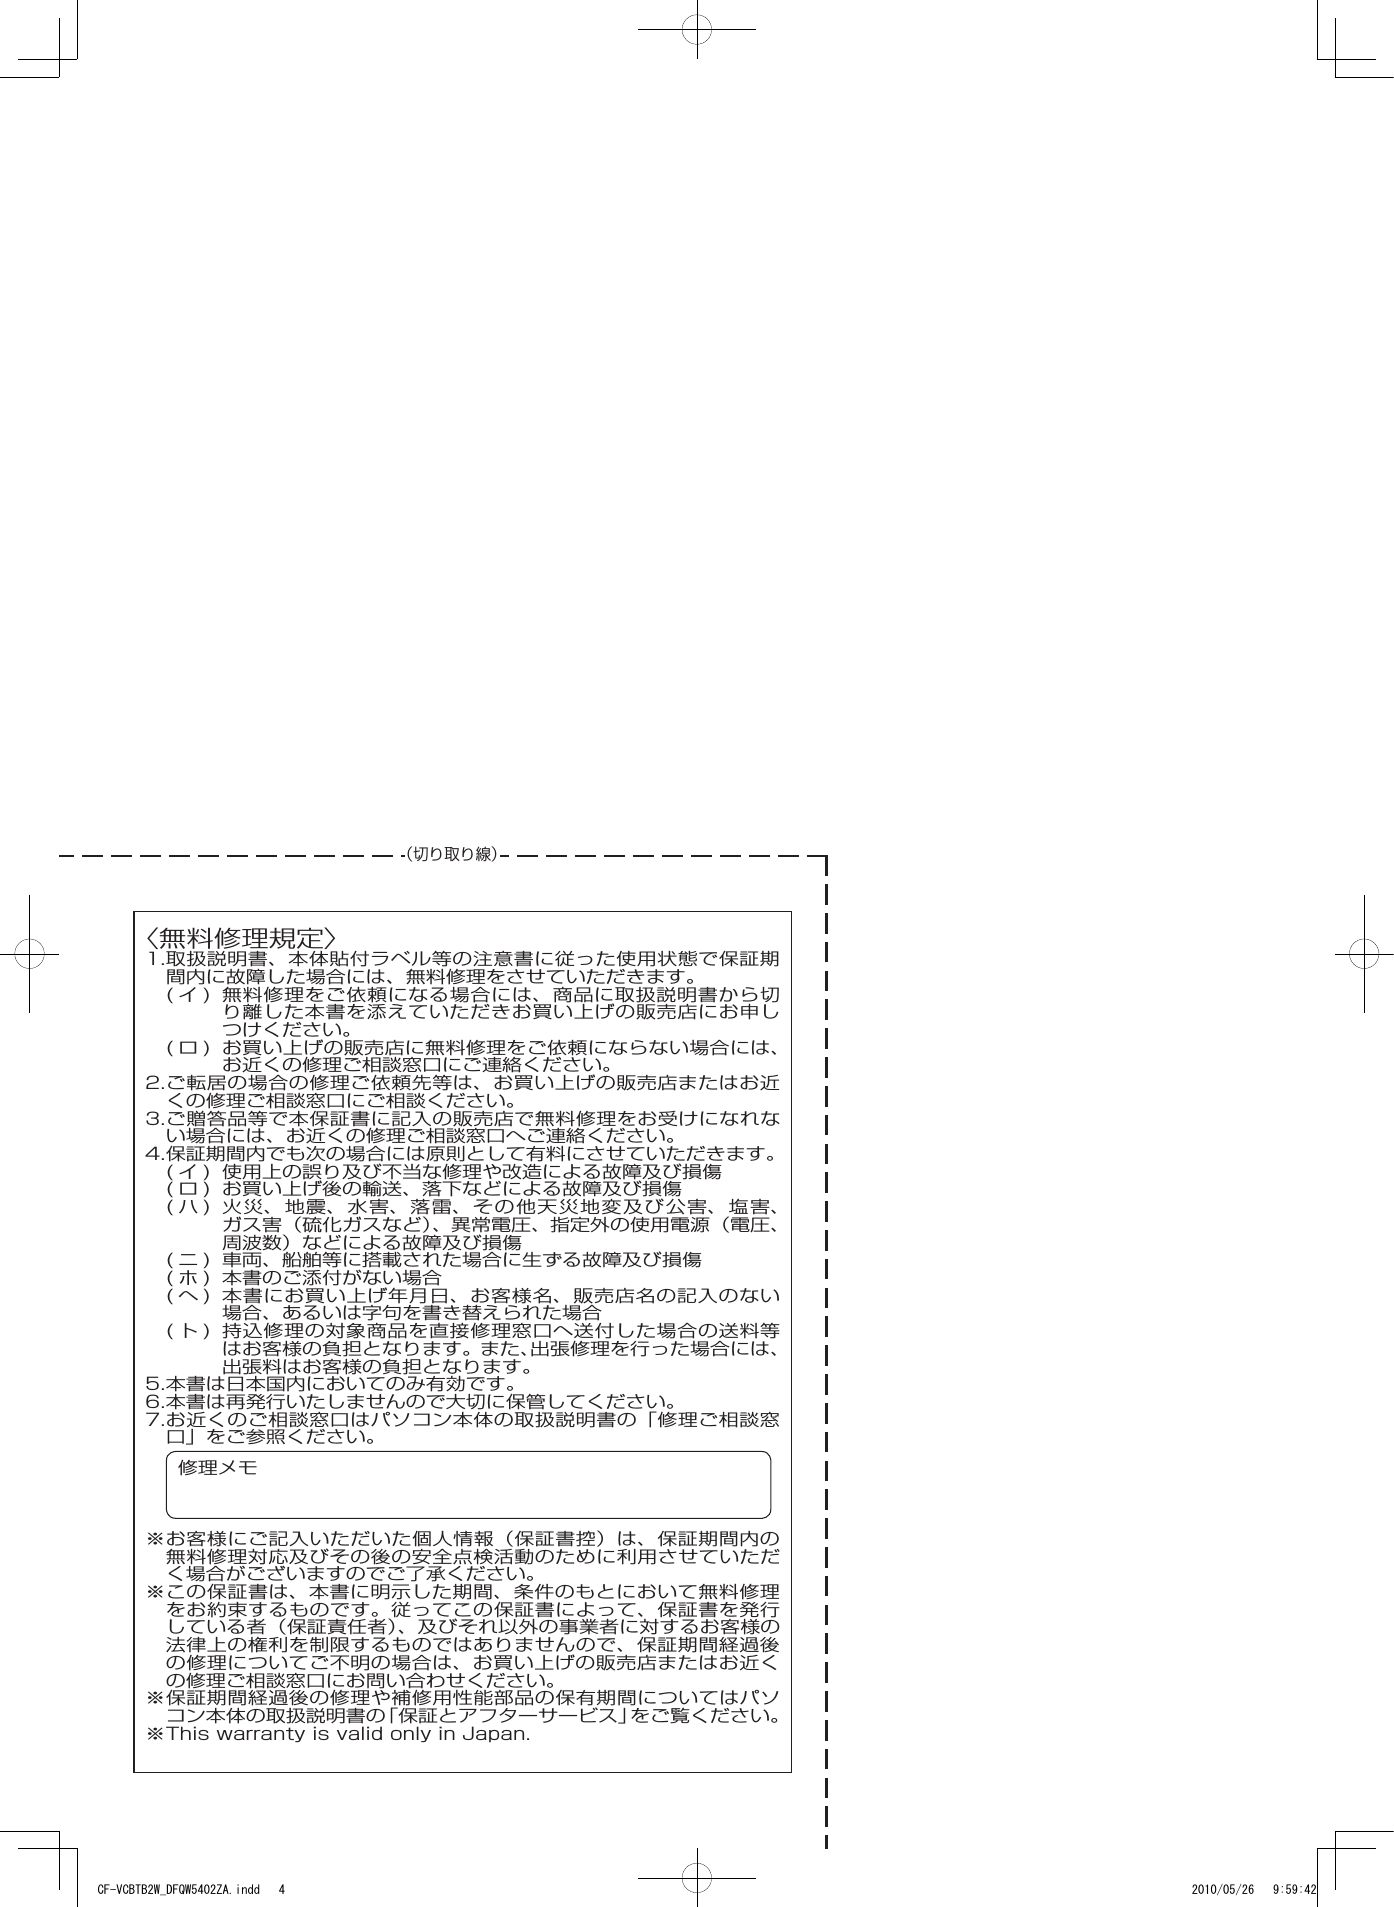 Page 3 of 8 - Panasonic CF-VCBxxx (Battery Charger) Operating Instructions User Manual : (English/ German/ French/ Korean/ Japanese) (Revision) Vcbtb2w-oi-dfqw5402ya-non-nonlogo-JMGFKO-p20110780